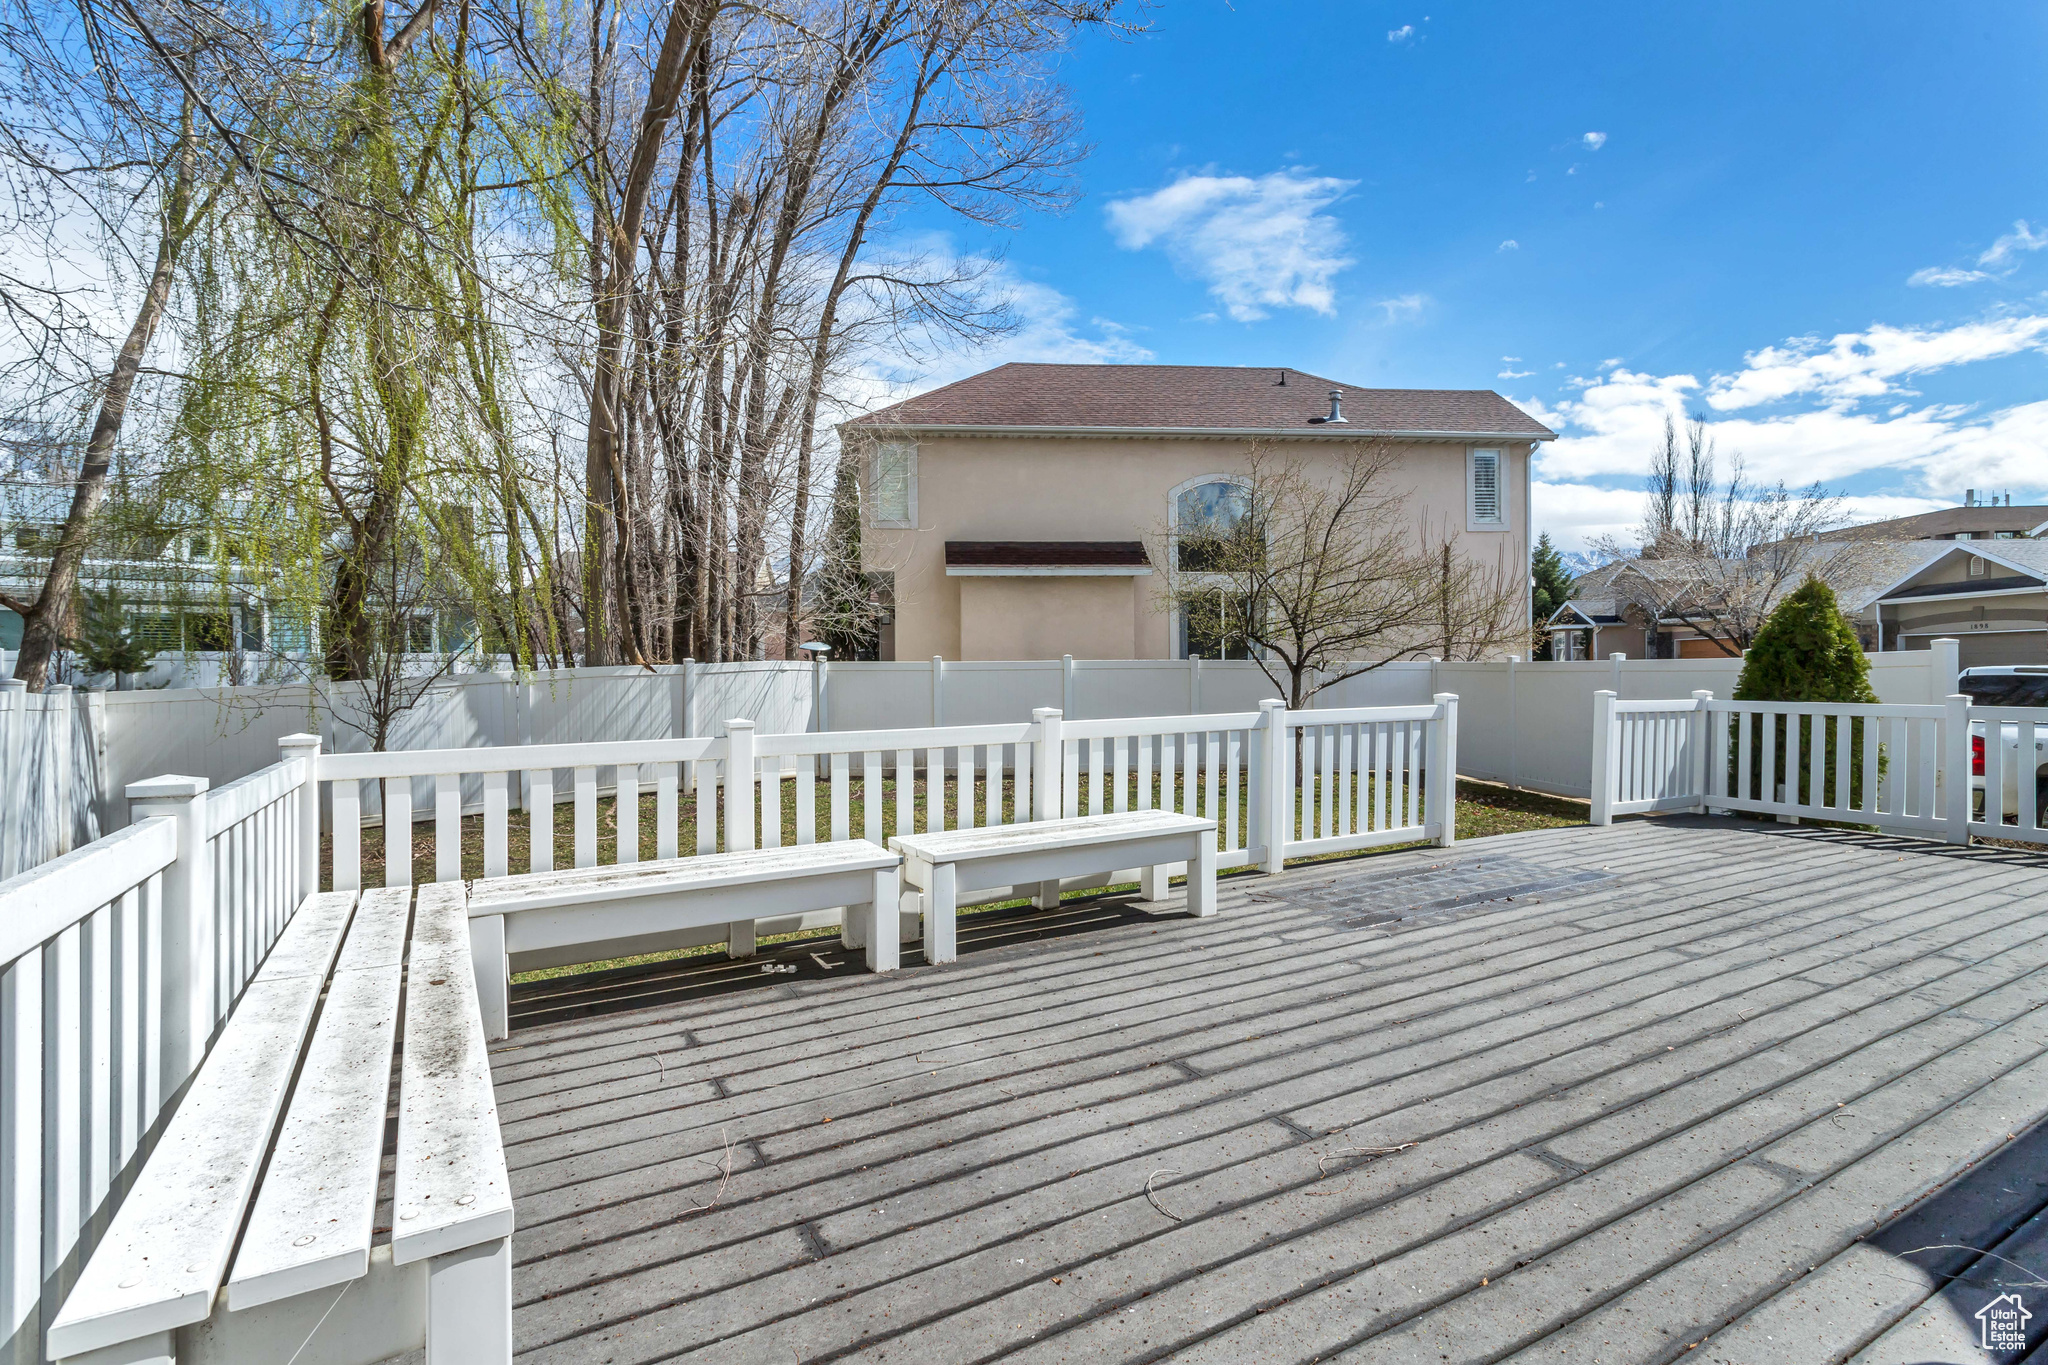 Oversized deck with state-of-the-art composite material for beauty durability, and sustainability. Plenty of bench seating for entertaining, and fenced backyard for privacy